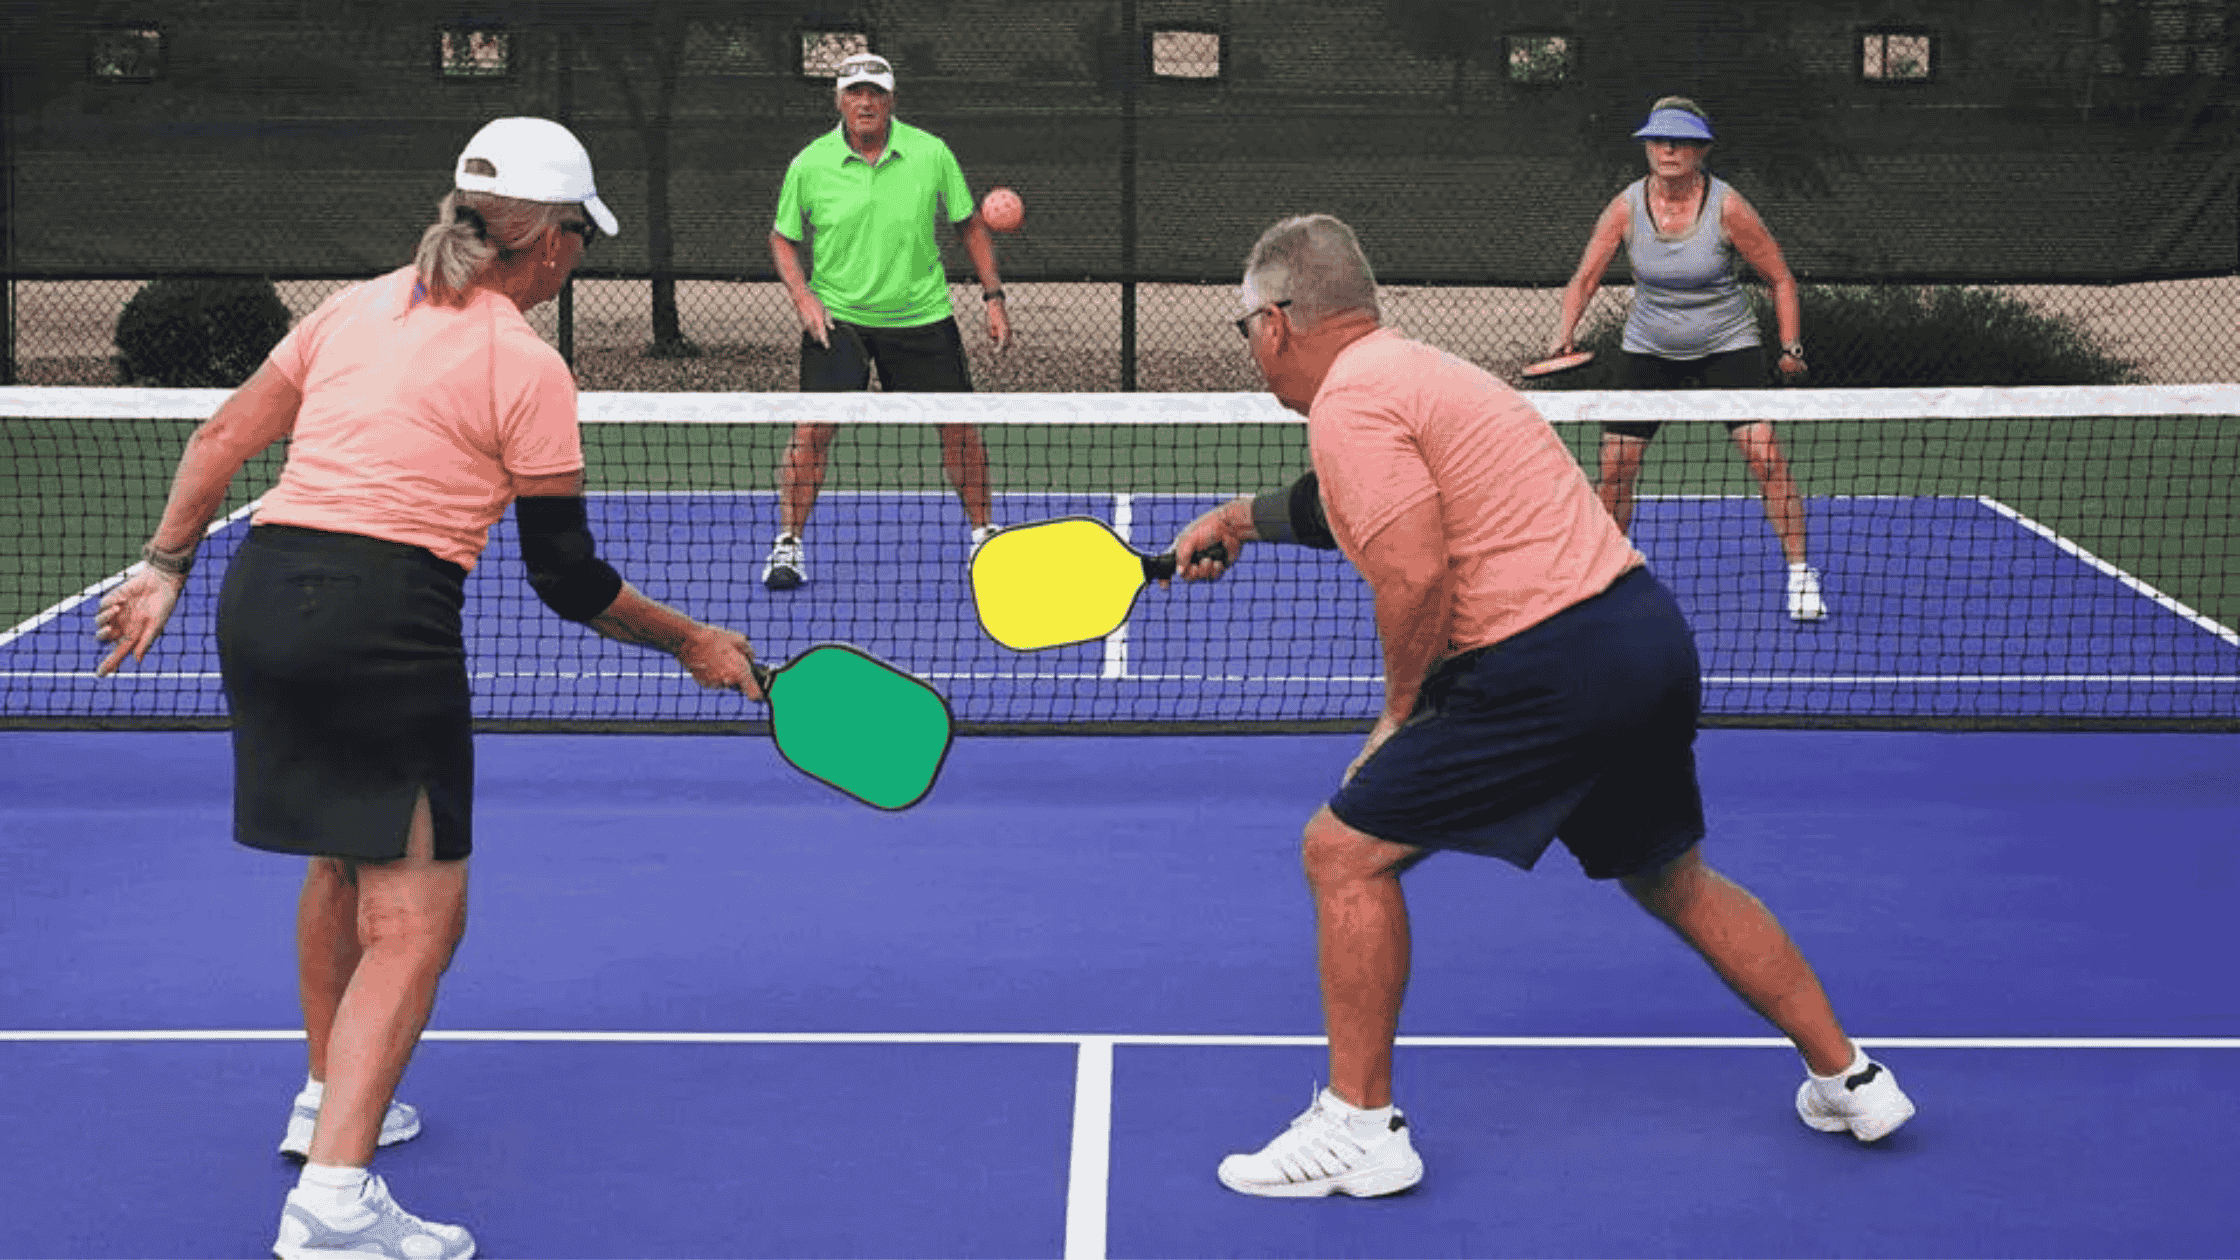 How Does Playing Pickleball Contribute to Overall Well-Being